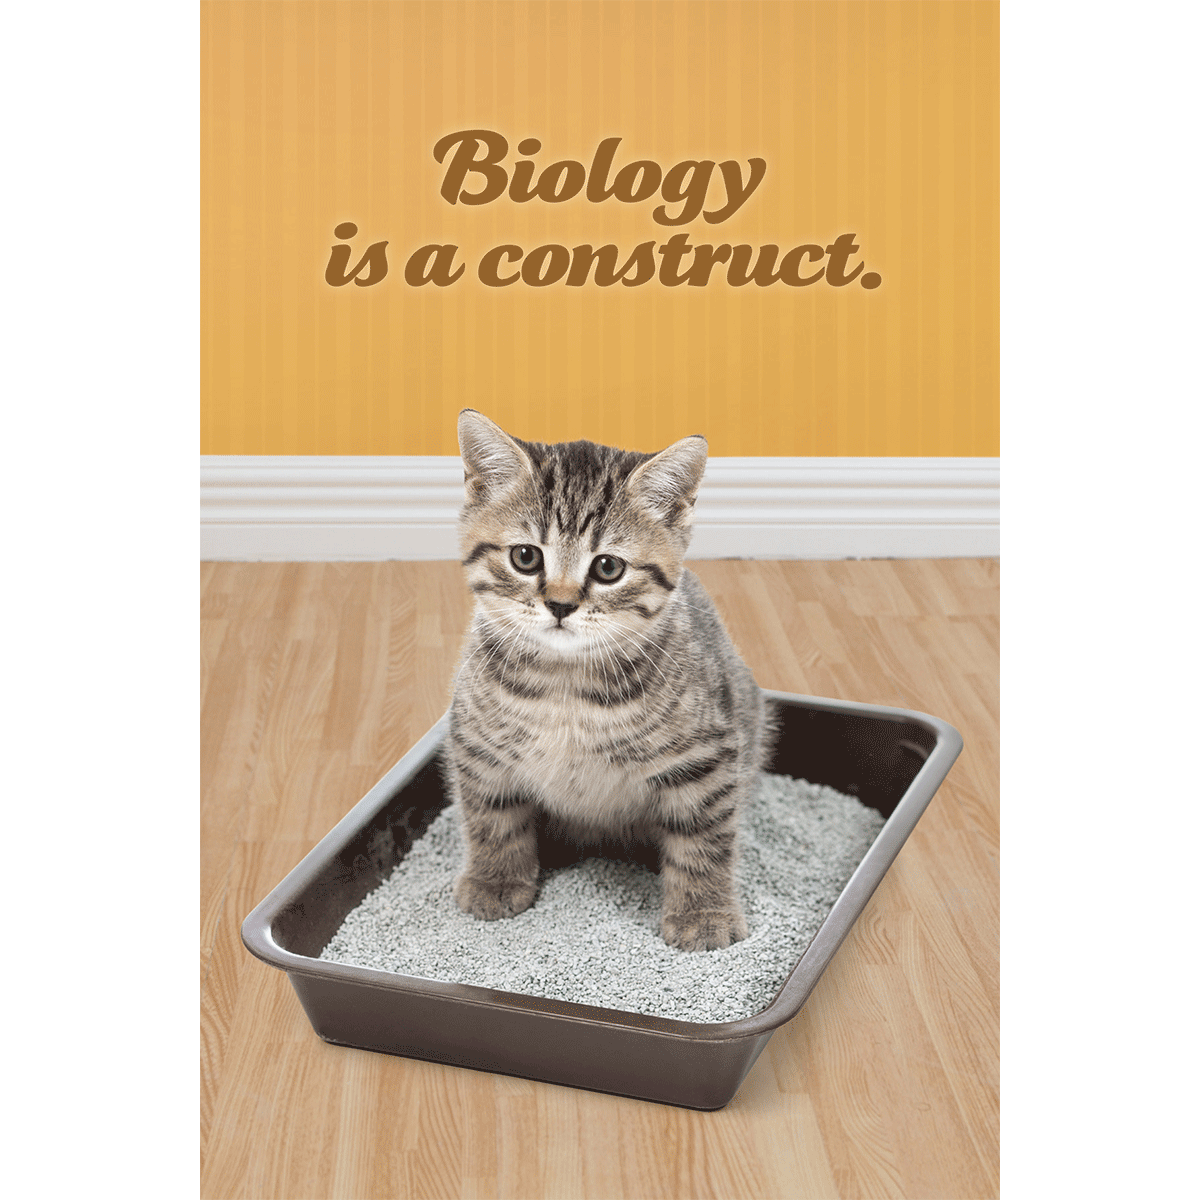 Biology Is a Construct